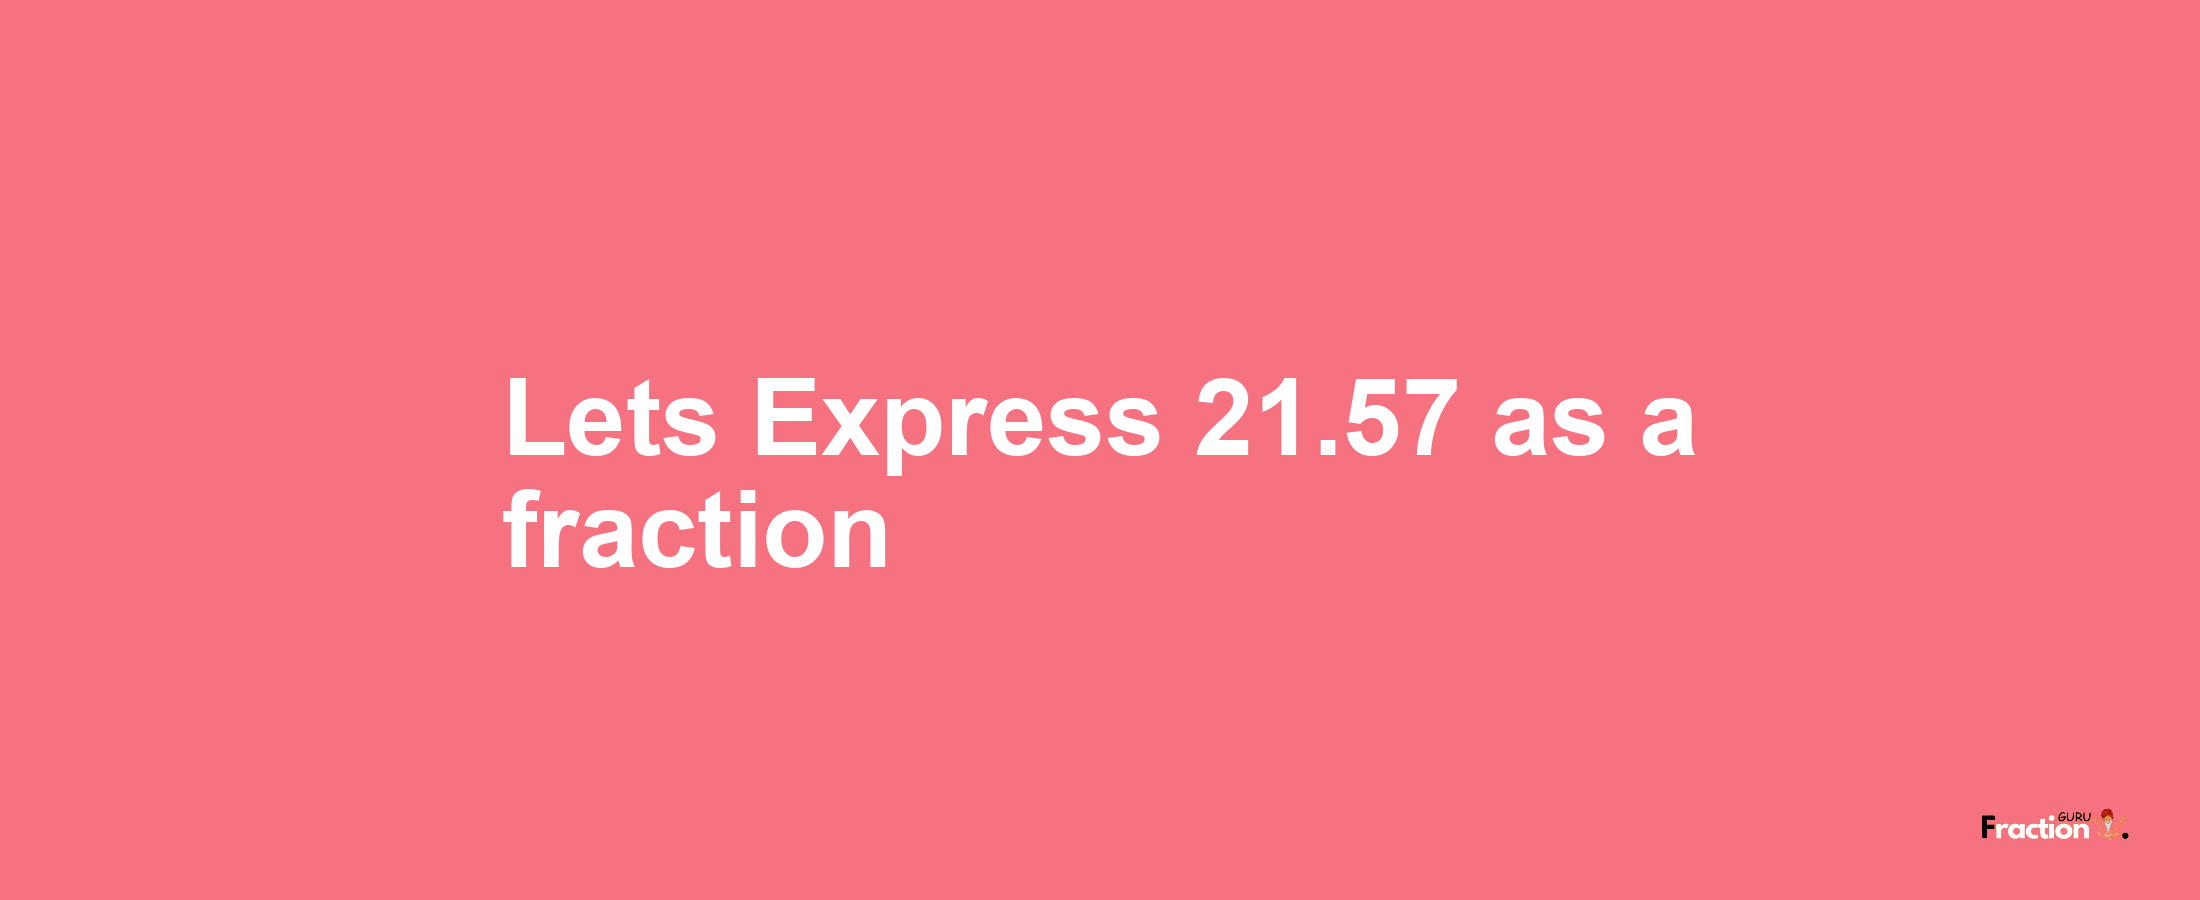 Lets Express 21.57 as afraction